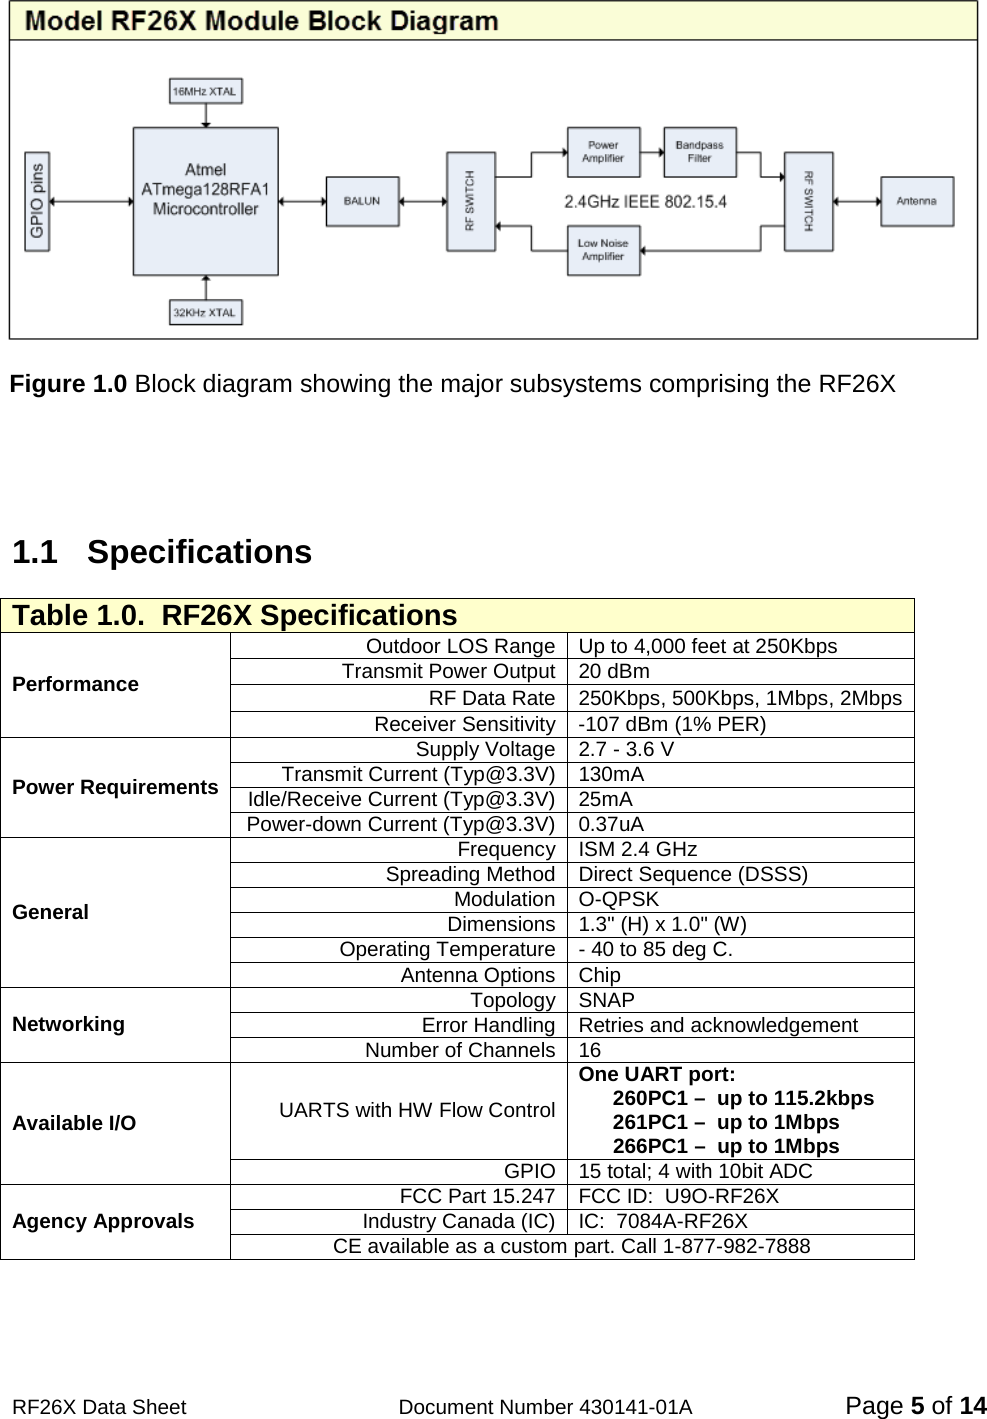                                            RF26X Data Sheet                  Document Number 430141-01A  Page 5 of 14   Figure 1.0 Block diagram showing the major subsystems comprising the RF26X   1.1  Specifications Table 1.0.  RF26X Specifications Performance Outdoor LOS Range Up to 4,000 feet at 250Kbps Transmit Power Output 20 dBm RF Data Rate 250Kbps, 500Kbps, 1Mbps, 2Mbps Receiver Sensitivity  -107 dBm (1% PER) Power Requirements Supply Voltage 2.7 - 3.6 V Transmit Current (Typ@3.3V) 130mA Idle/Receive Current (Typ@3.3V) 25mA Power-down Current (Typ@3.3V) 0.37uA General Frequency ISM 2.4 GHz Spreading Method Direct Sequence (DSSS) Modulation O-QPSK Dimensions 1.3&quot; (H) x 1.0&quot; (W) Operating Temperature - 40 to 85 deg C. Antenna Options Chip Networking Topology SNAP Error Handling Retries and acknowledgement Number of Channels 16 Available I/O UARTS with HW Flow Control One UART port:        260PC1 –  up to 115.2kbps       261PC1 –  up to 1Mbps       266PC1 –  up to 1Mbps GPIO 15 total; 4 with 10bit ADC Agency Approvals FCC Part 15.247 FCC ID:  U9O-RF26X Industry Canada (IC) IC:  7084A-RF26X CE available as a custom part. Call 1-877-982-7888  